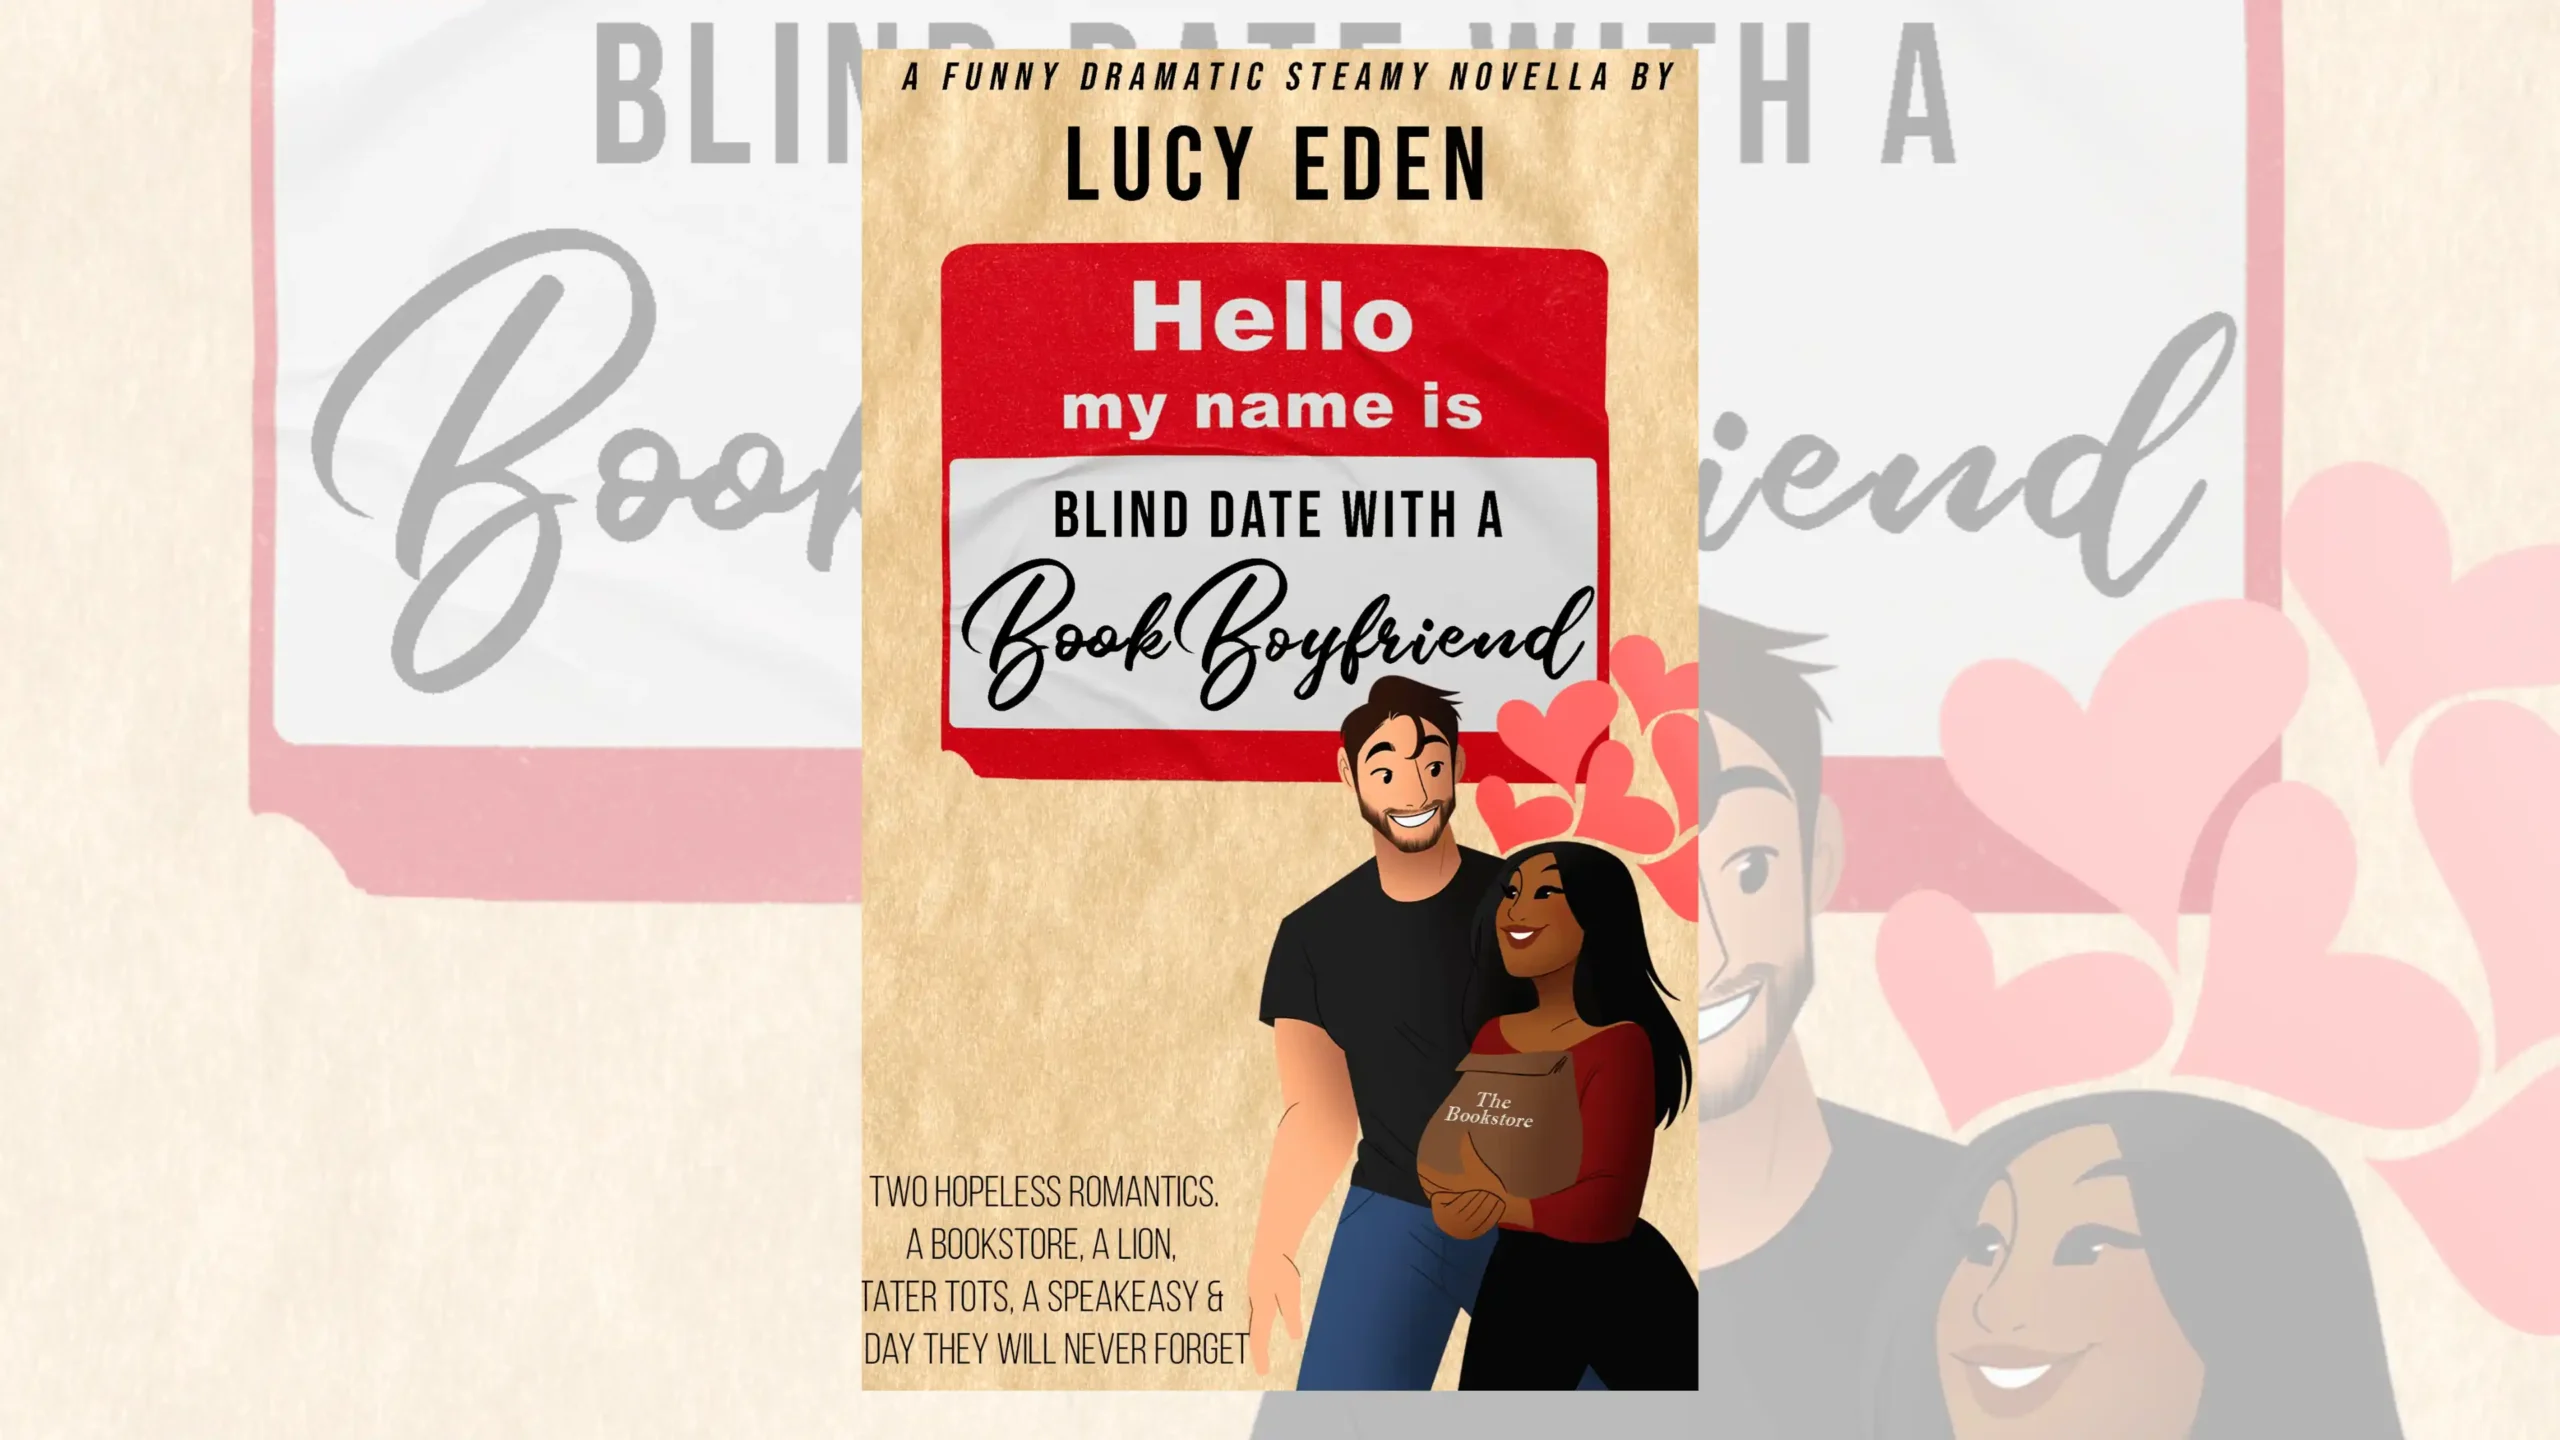 Blind date with book boyfriend scaled